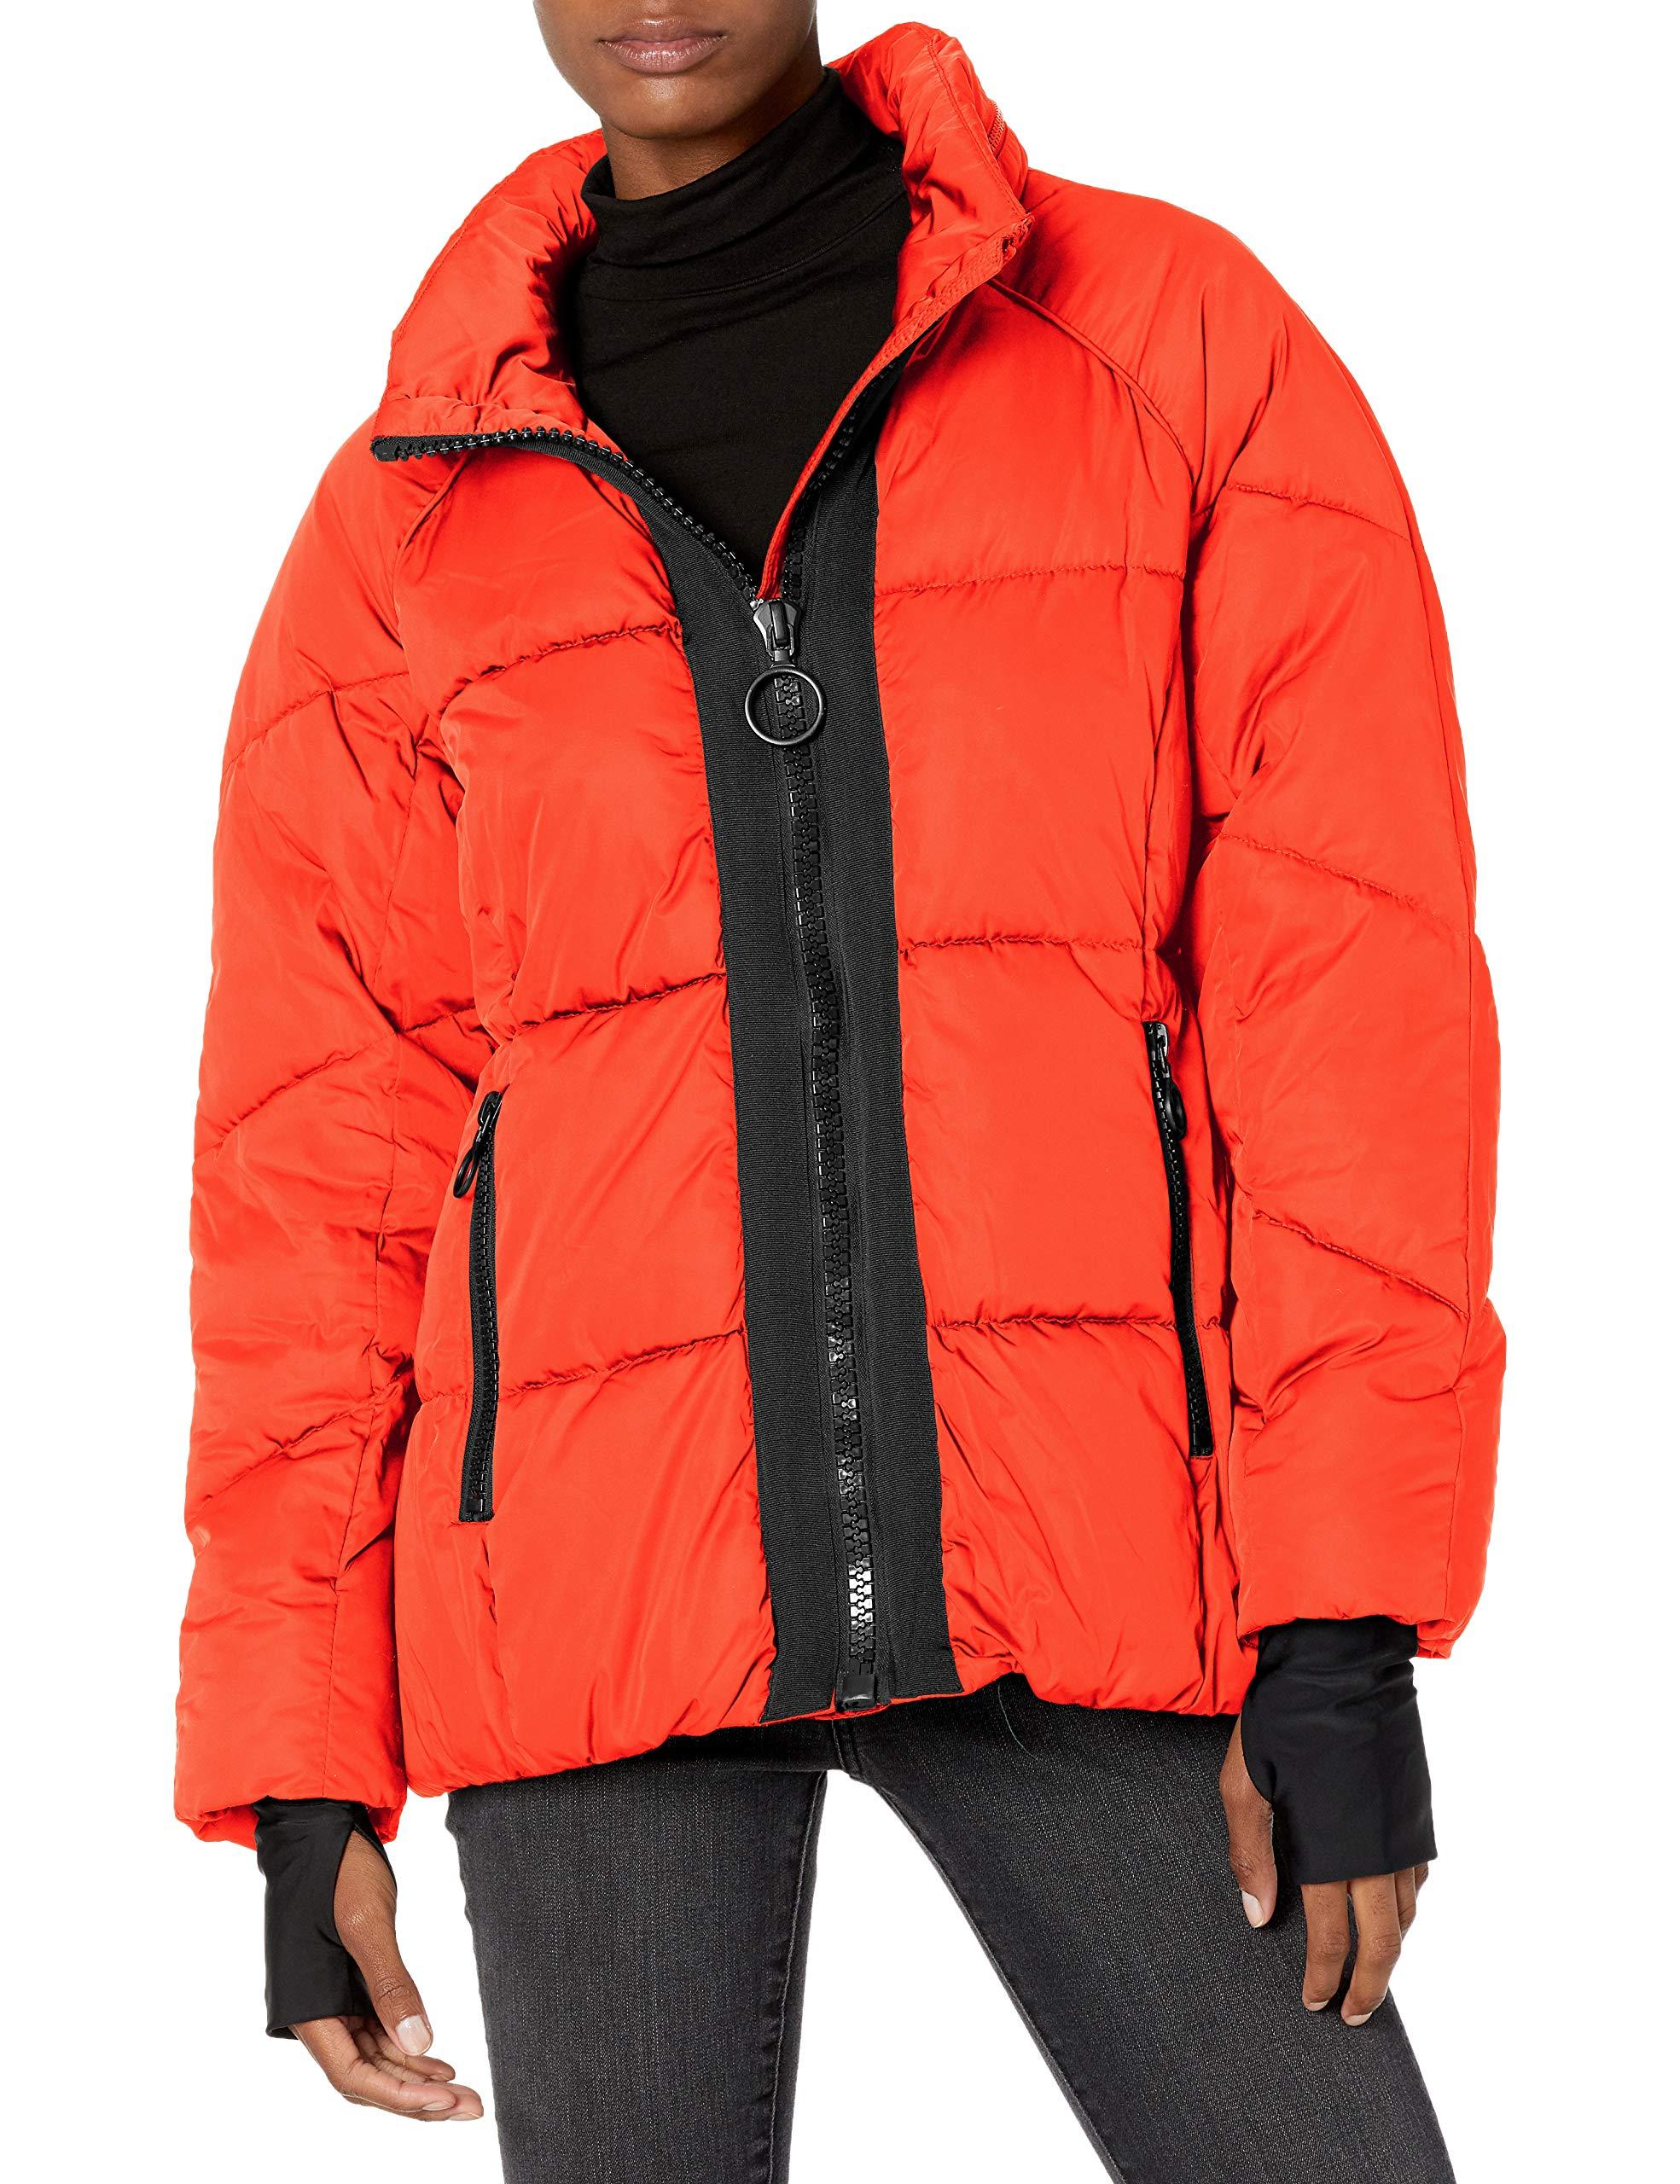 Steve Madden Synthetic Nylon Puffer Jacket in Red - Lyst